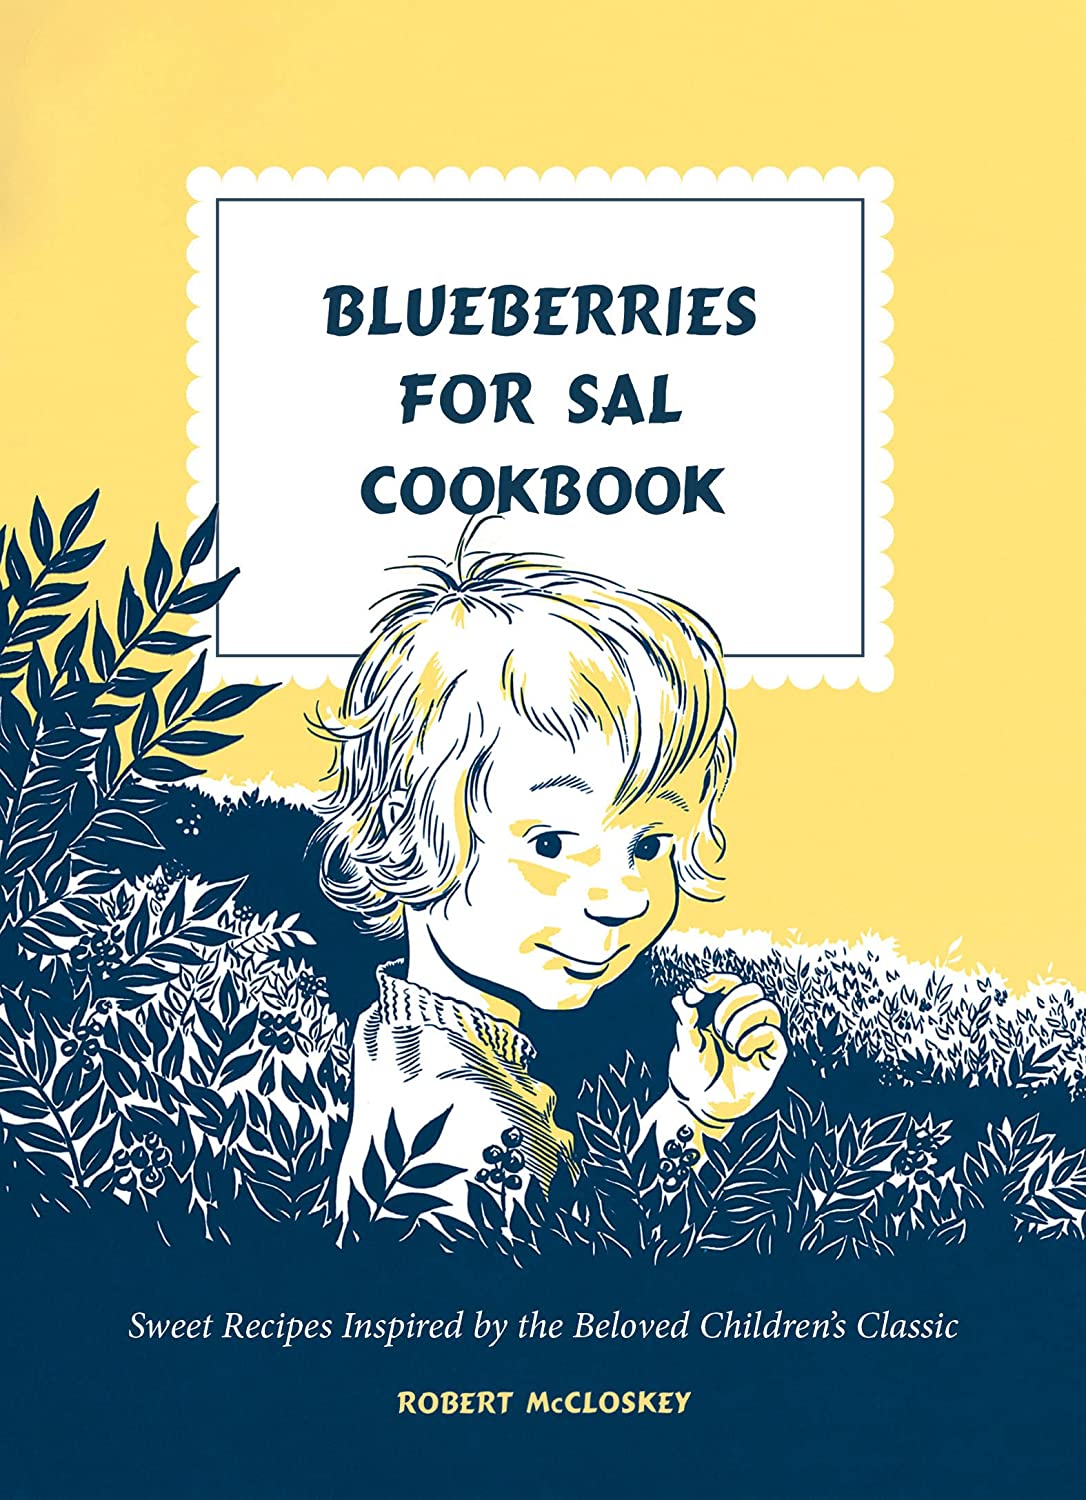 Blueberries for Sal Cookbook: Sweet Recipes Inspired by the Beloved Children’s Classic